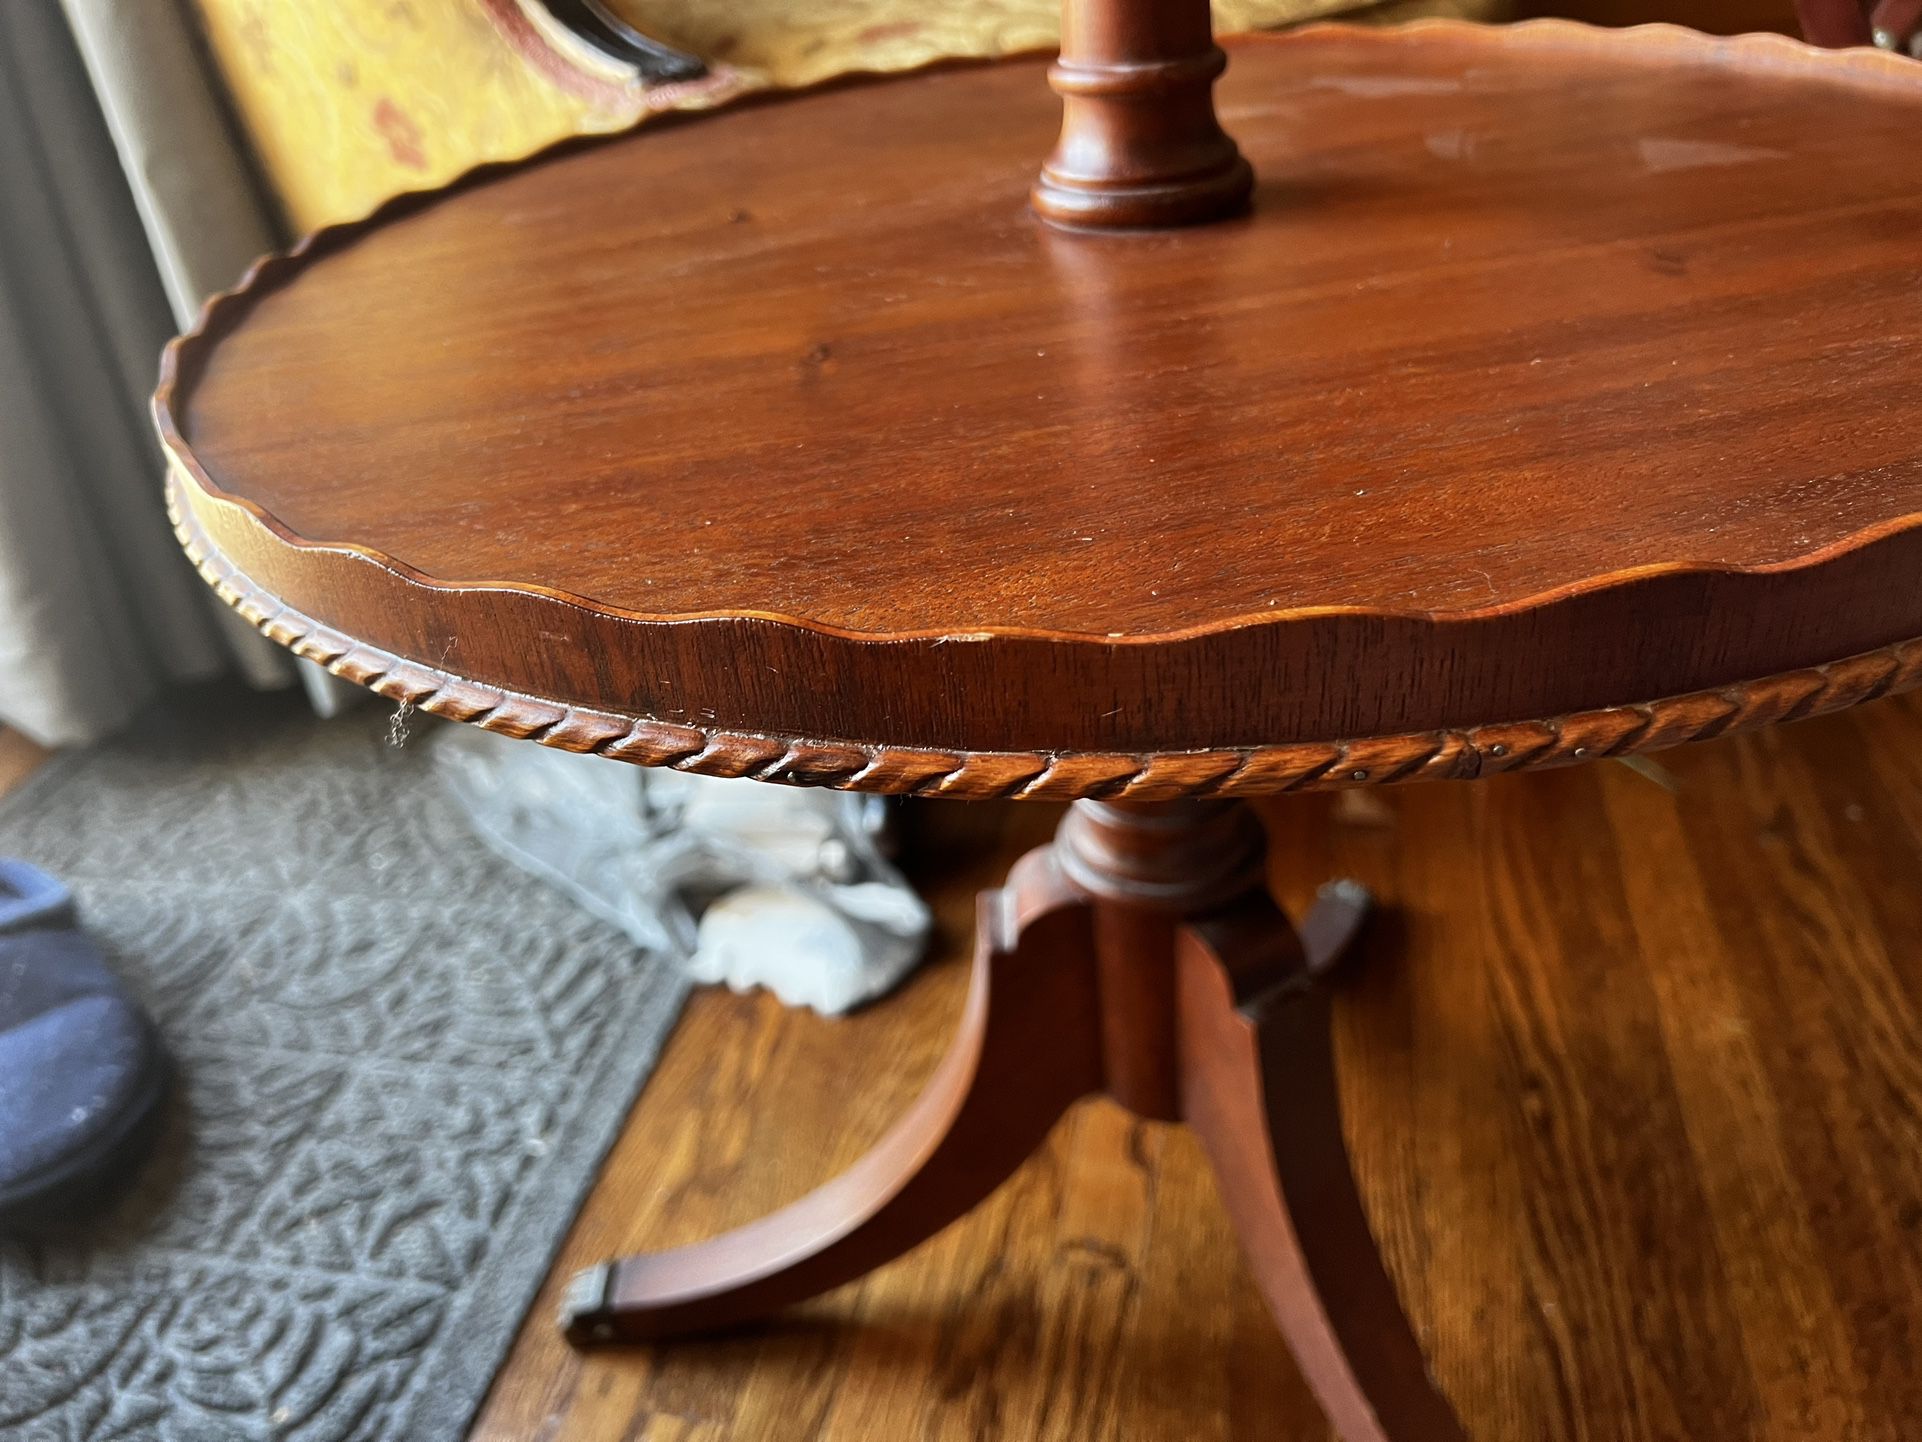 Reduced $100 Very nice Wabash antique mahogany Duncan Phyfe pie crust tiered table 